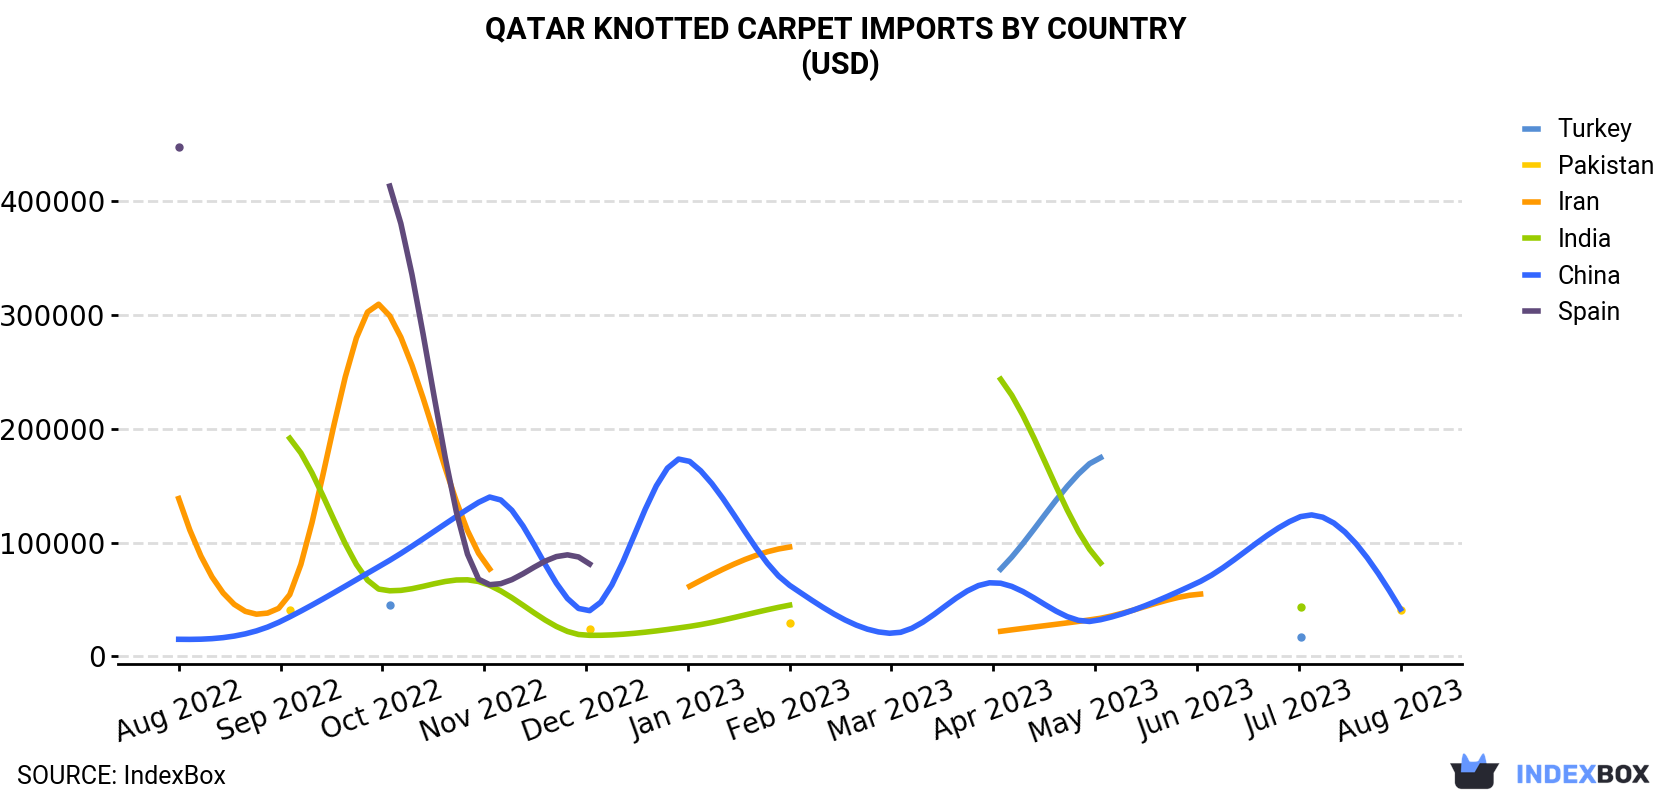 Qatar Knotted Carpet Imports By Country (USD)